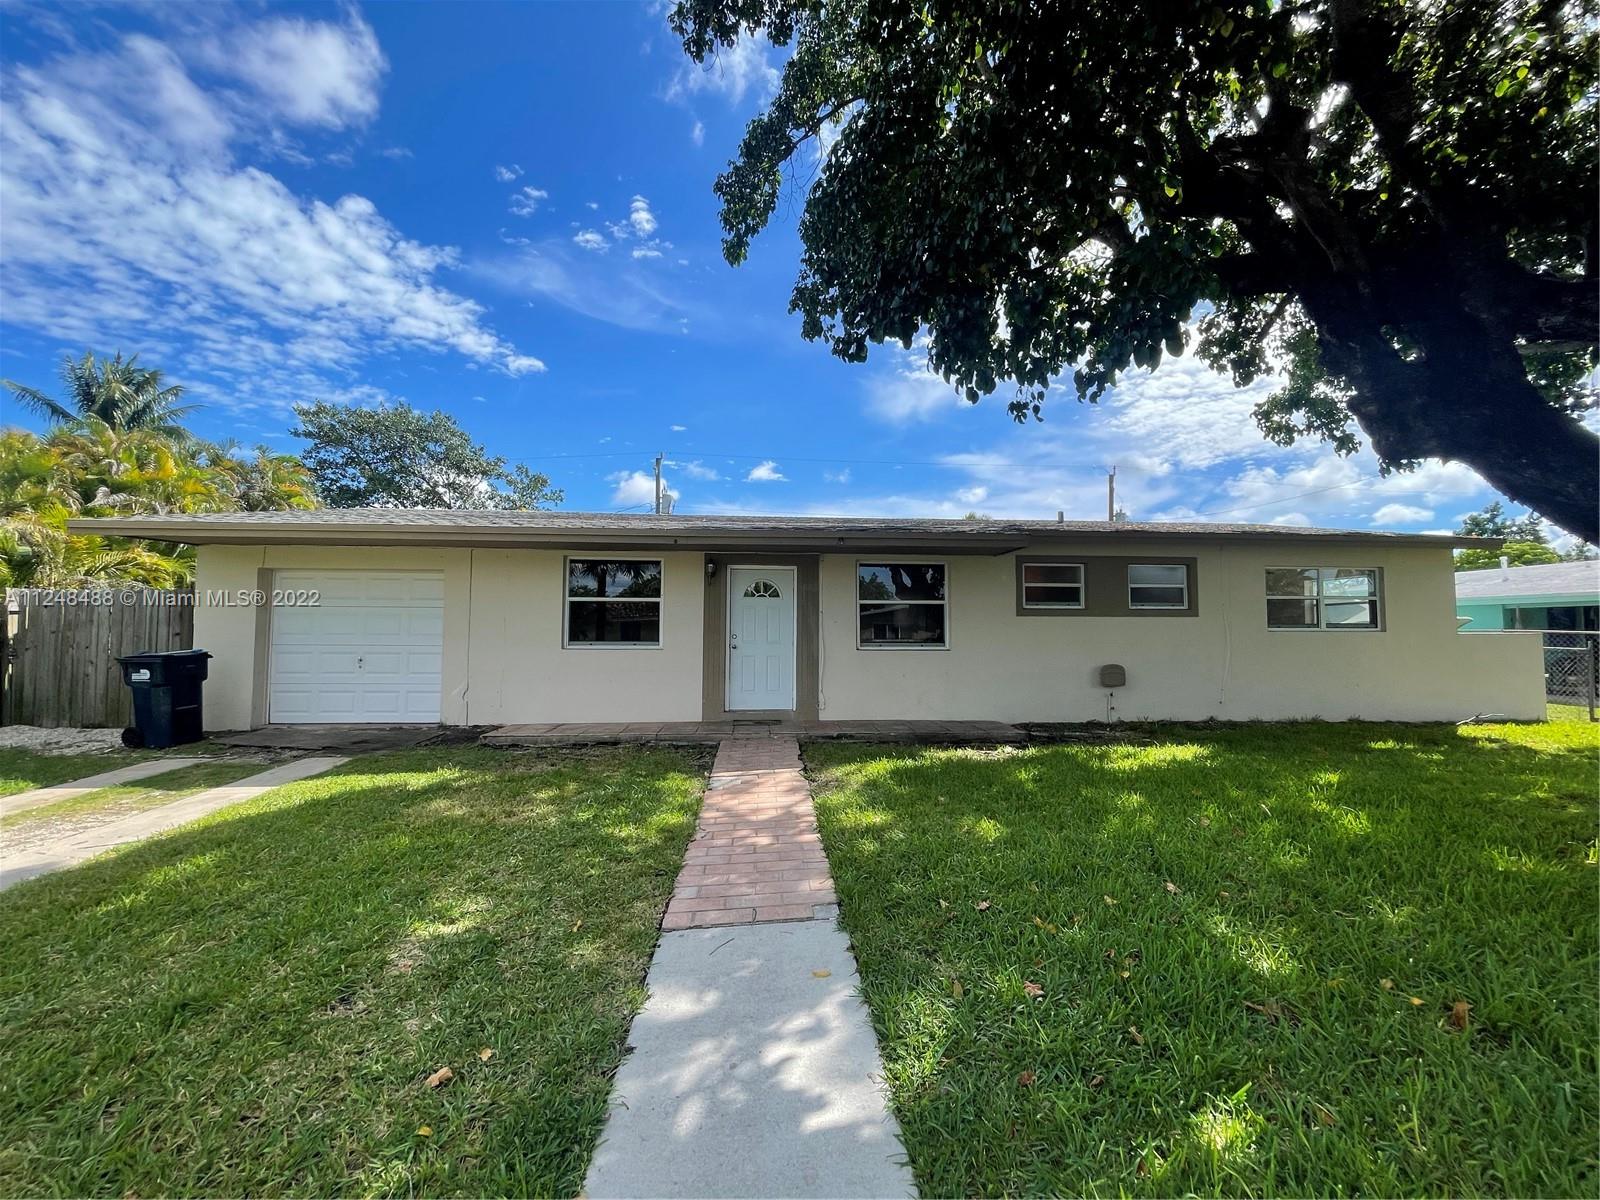 Come turn this 4 bedroom 2 bath 1 car garage house into your forever home! Situated in the heart of Cutler Bay, this property is just minutes from shopping centers, restaurants, and the turnpike!